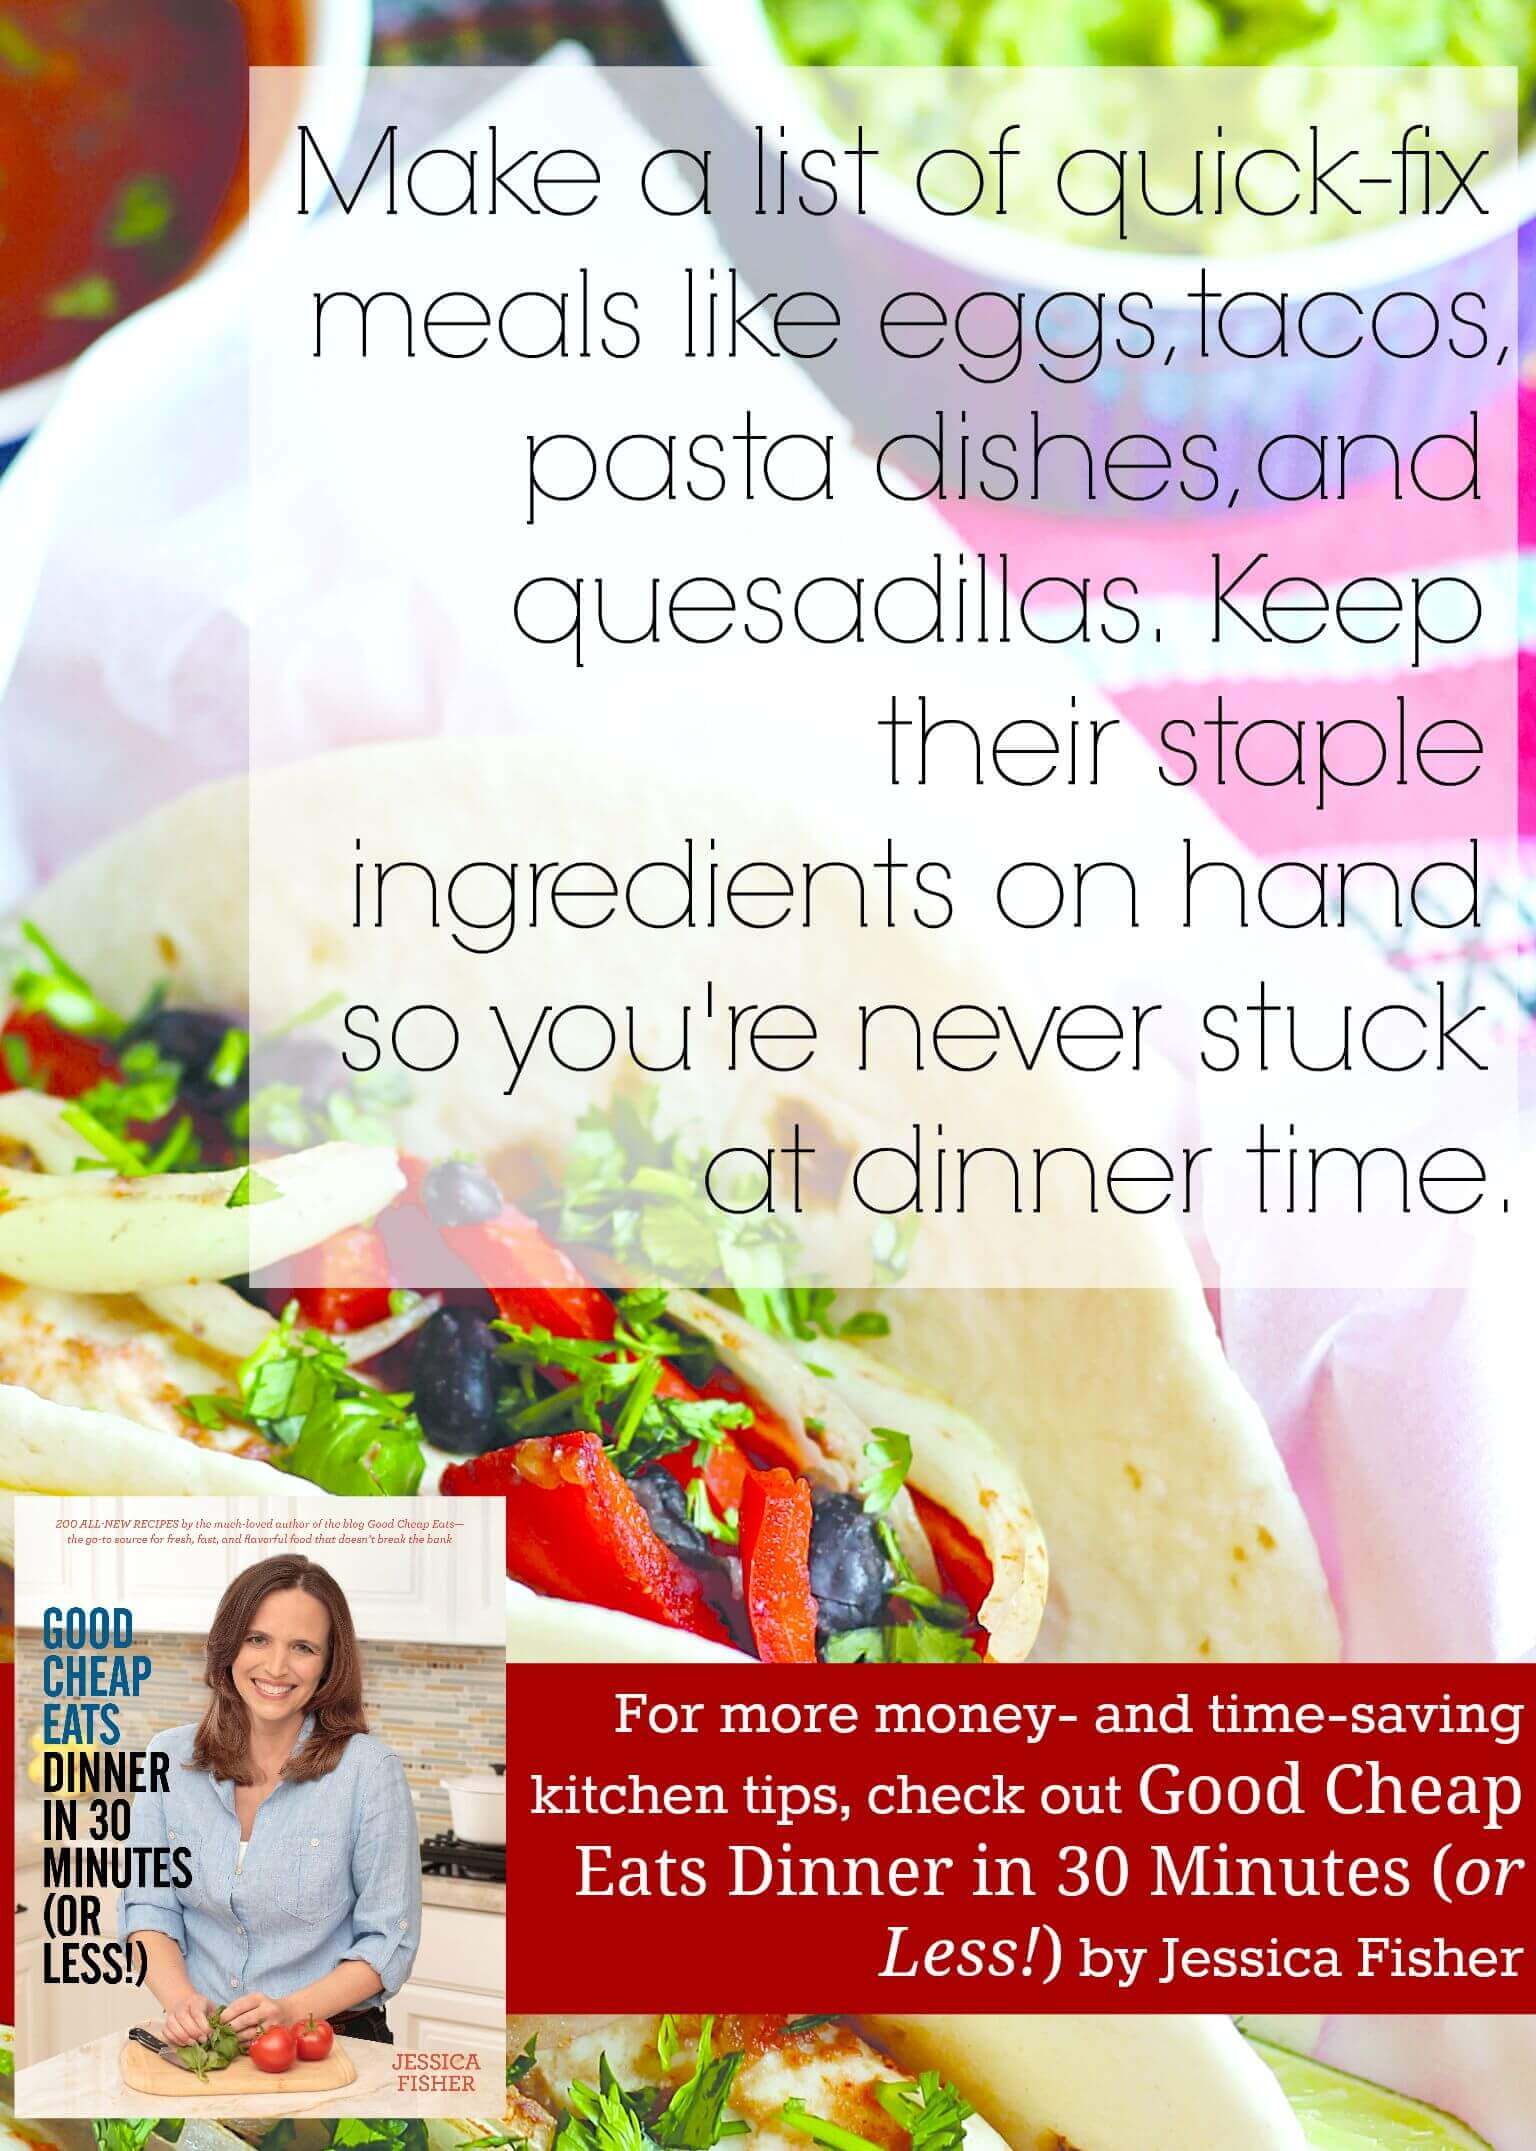 Do you love serving up homemade food to your family but wish it didn't take so much time? Here's some of the top secrets from Jessica from Good Cheap Eats! Have a REAL FOOD dinner on the table in 30 minutes or less with these secrets!